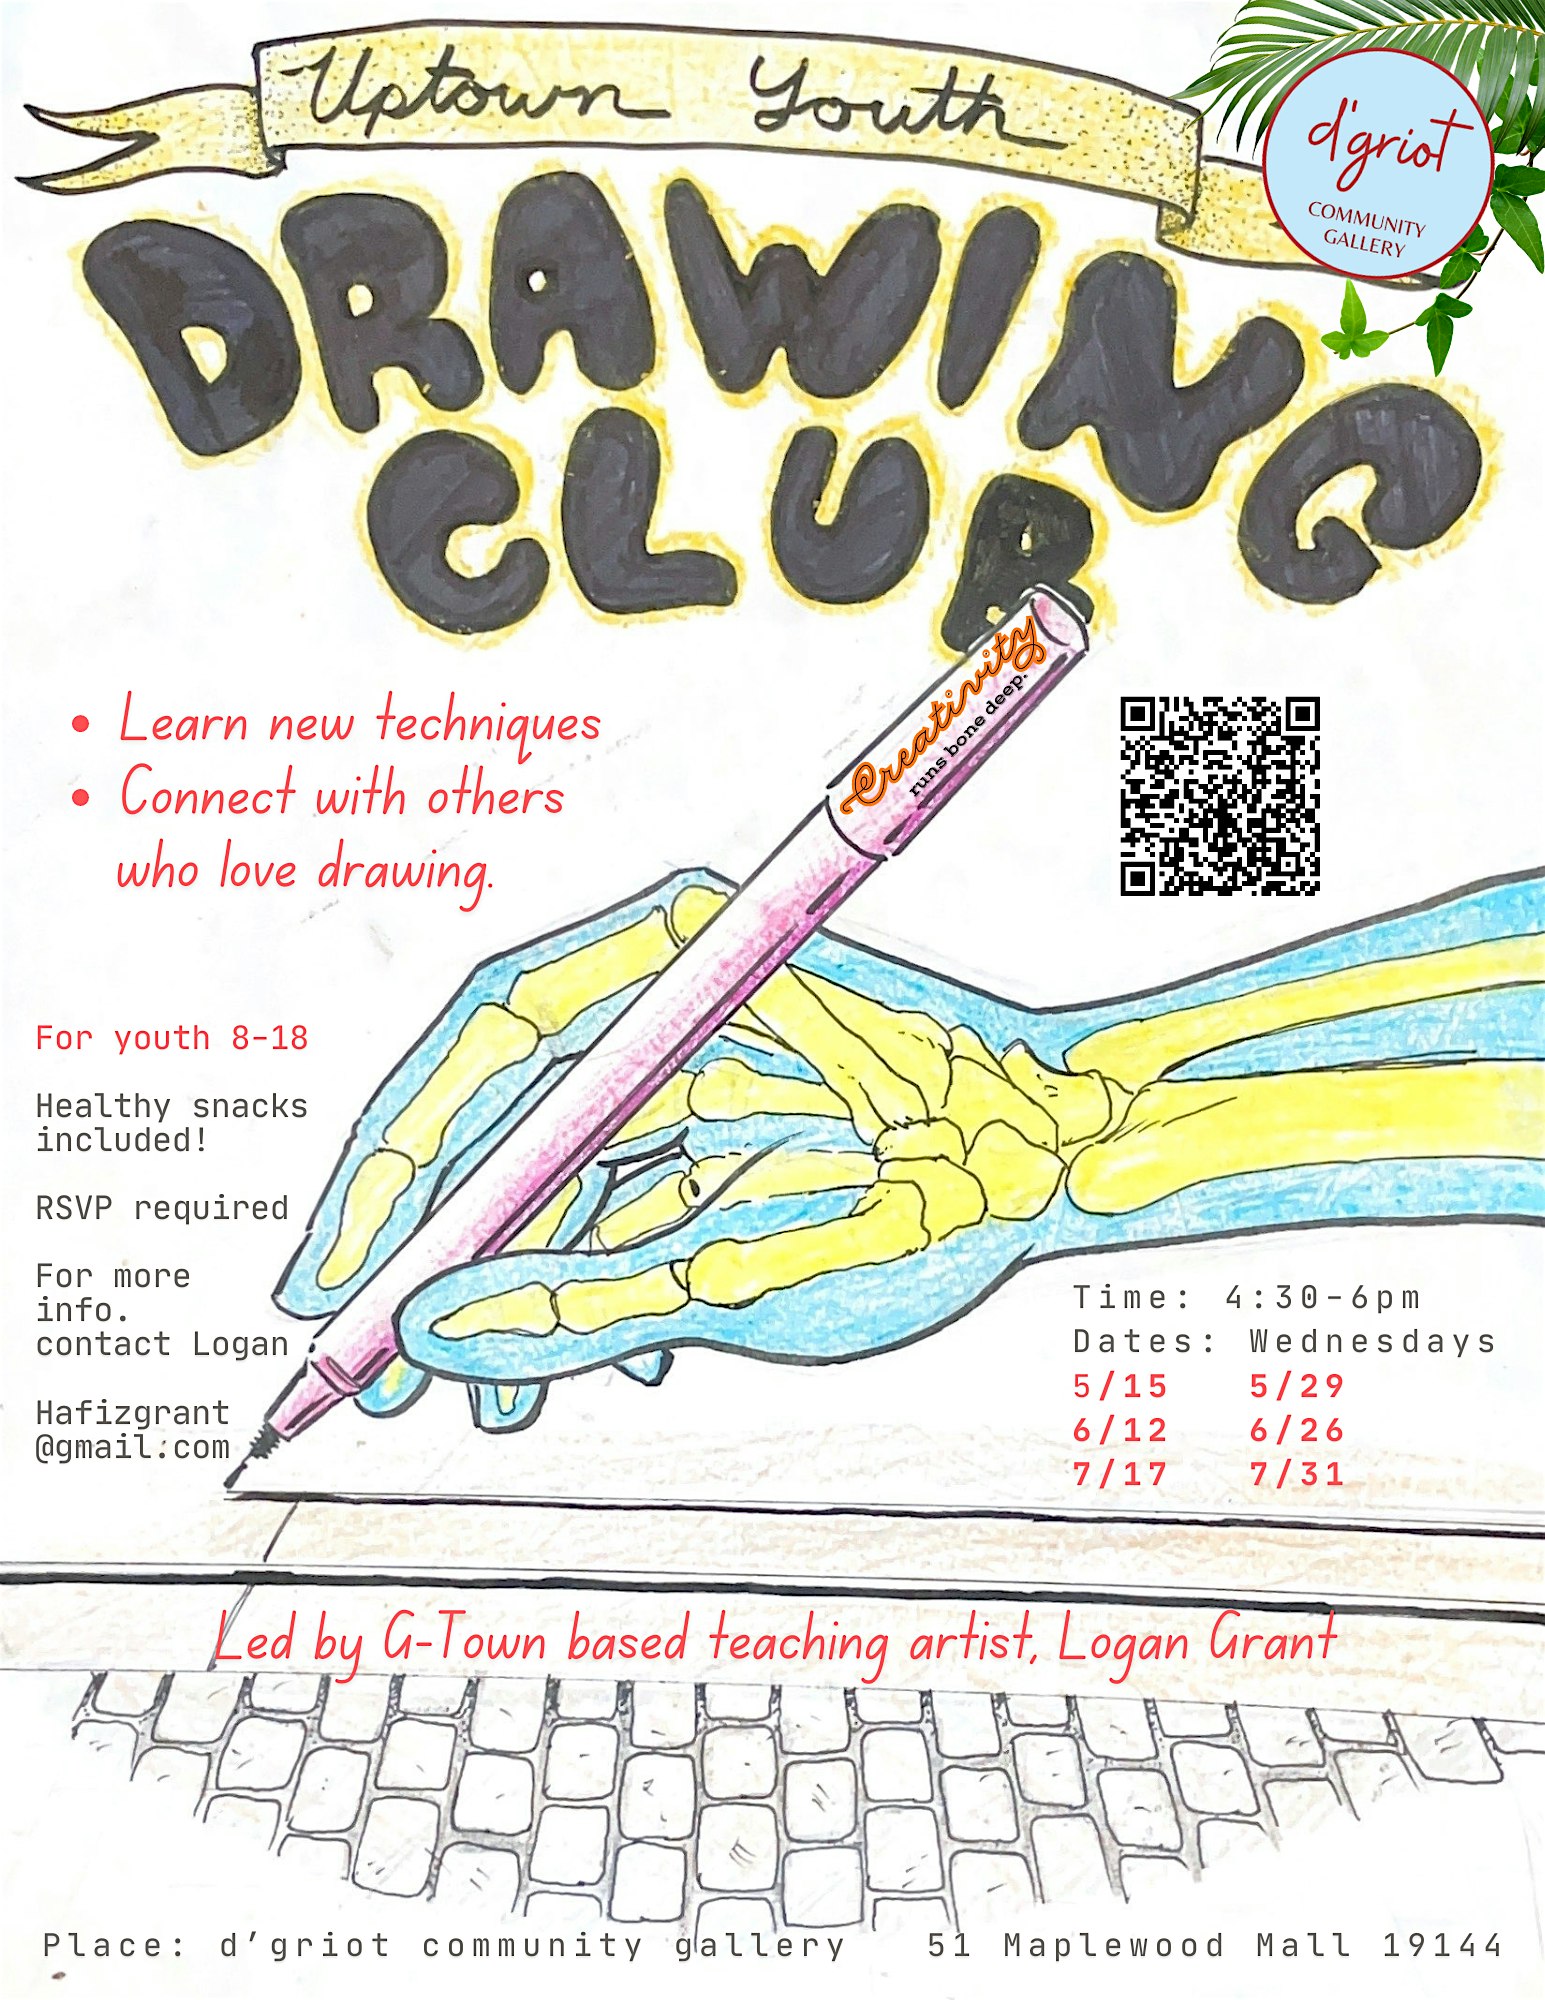 Uptown Youth Drawing Club @d'griot